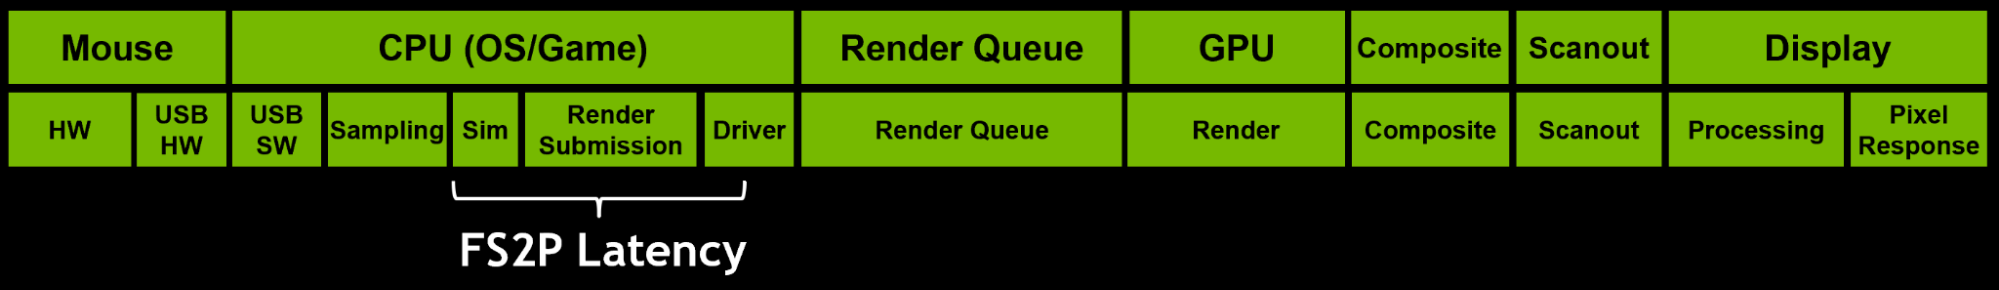 Diagram showing what part of the CPU contributes to FS2P latency: Sim, Render Submission, and Driver.